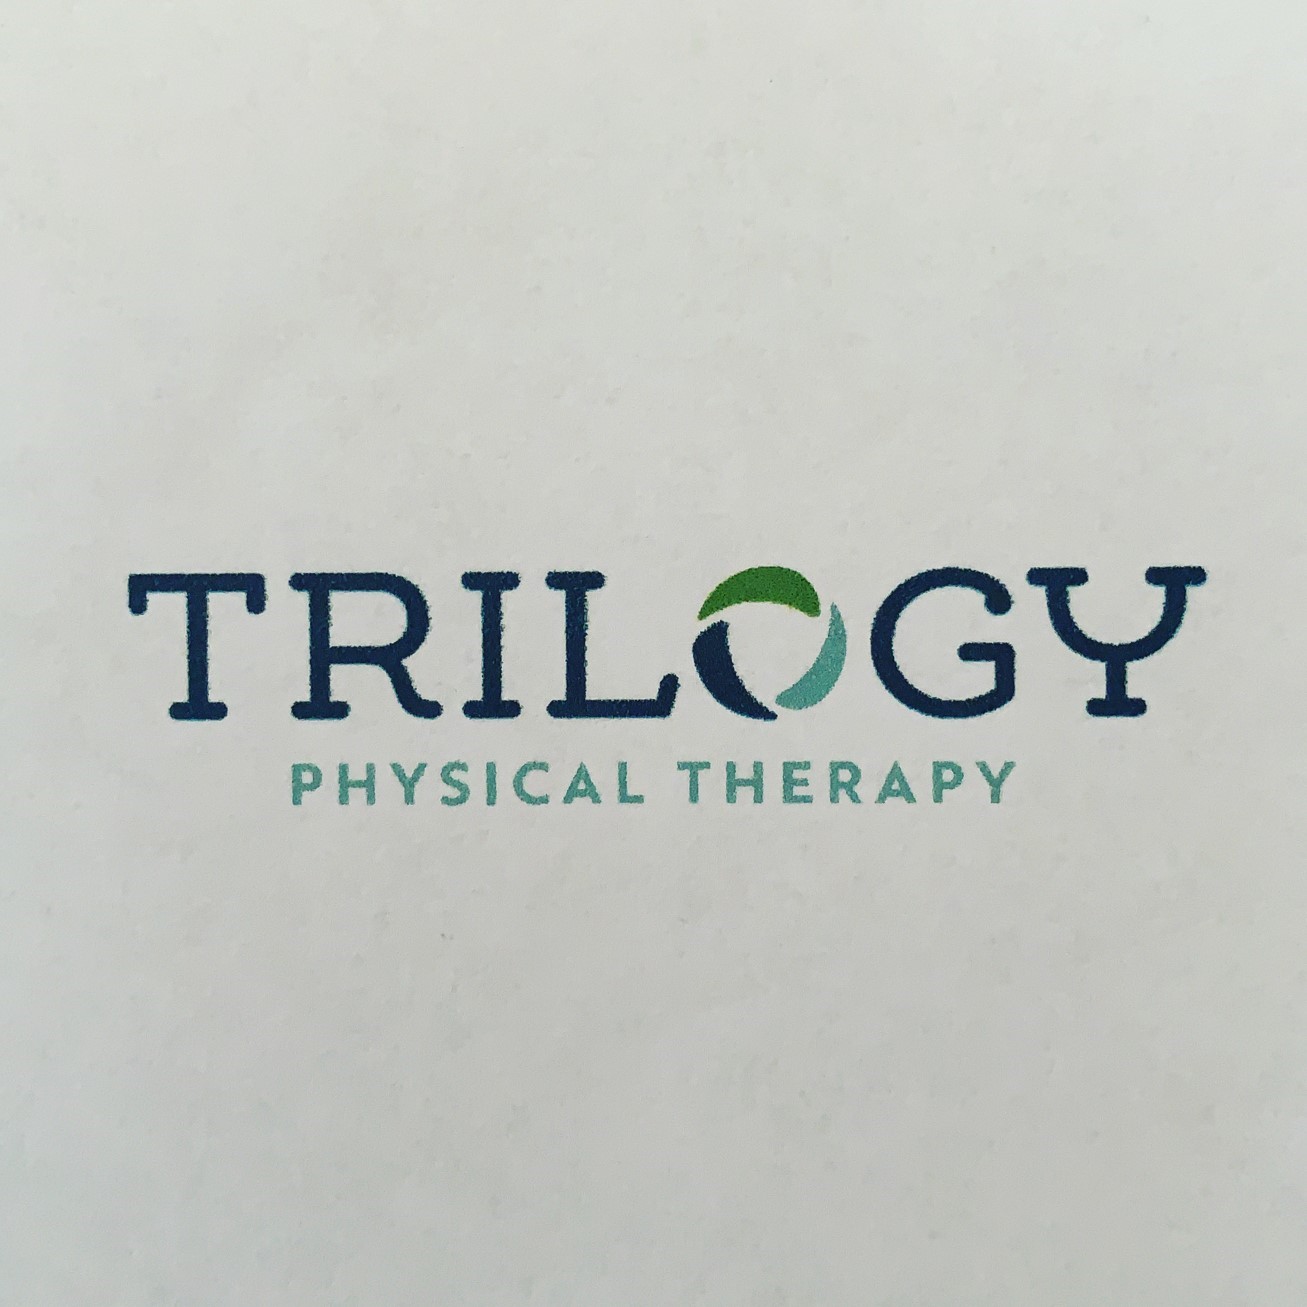 Trilogy Physical Therapy